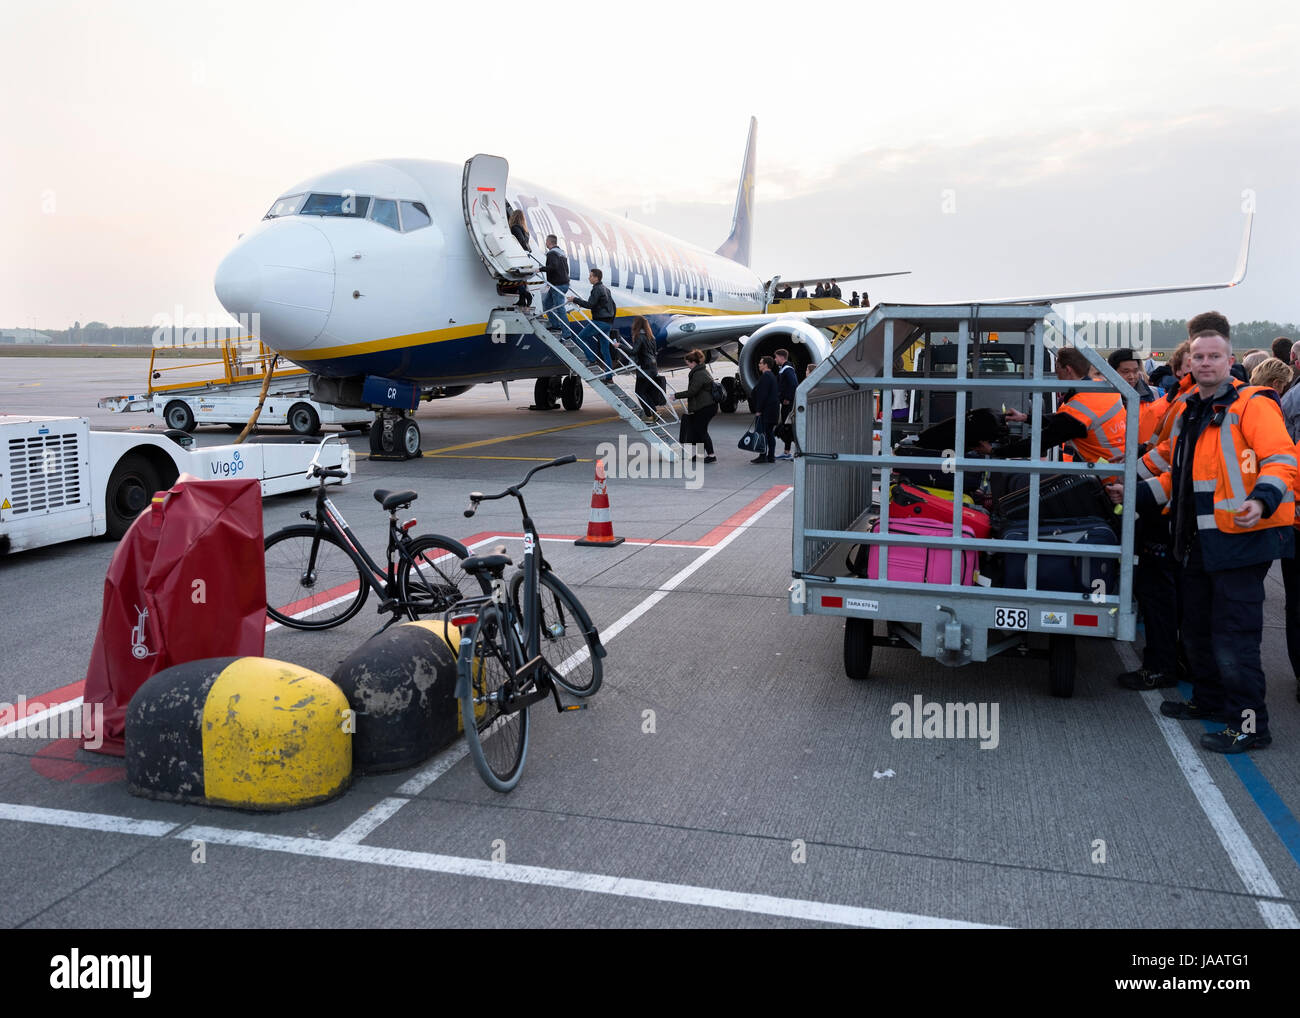 Eindhoven, Netherlands, 5 may 2017: luggage and bicycles waiting while passengers board ryanair airplane on eindhoven airport in the netherlands Stock Photo